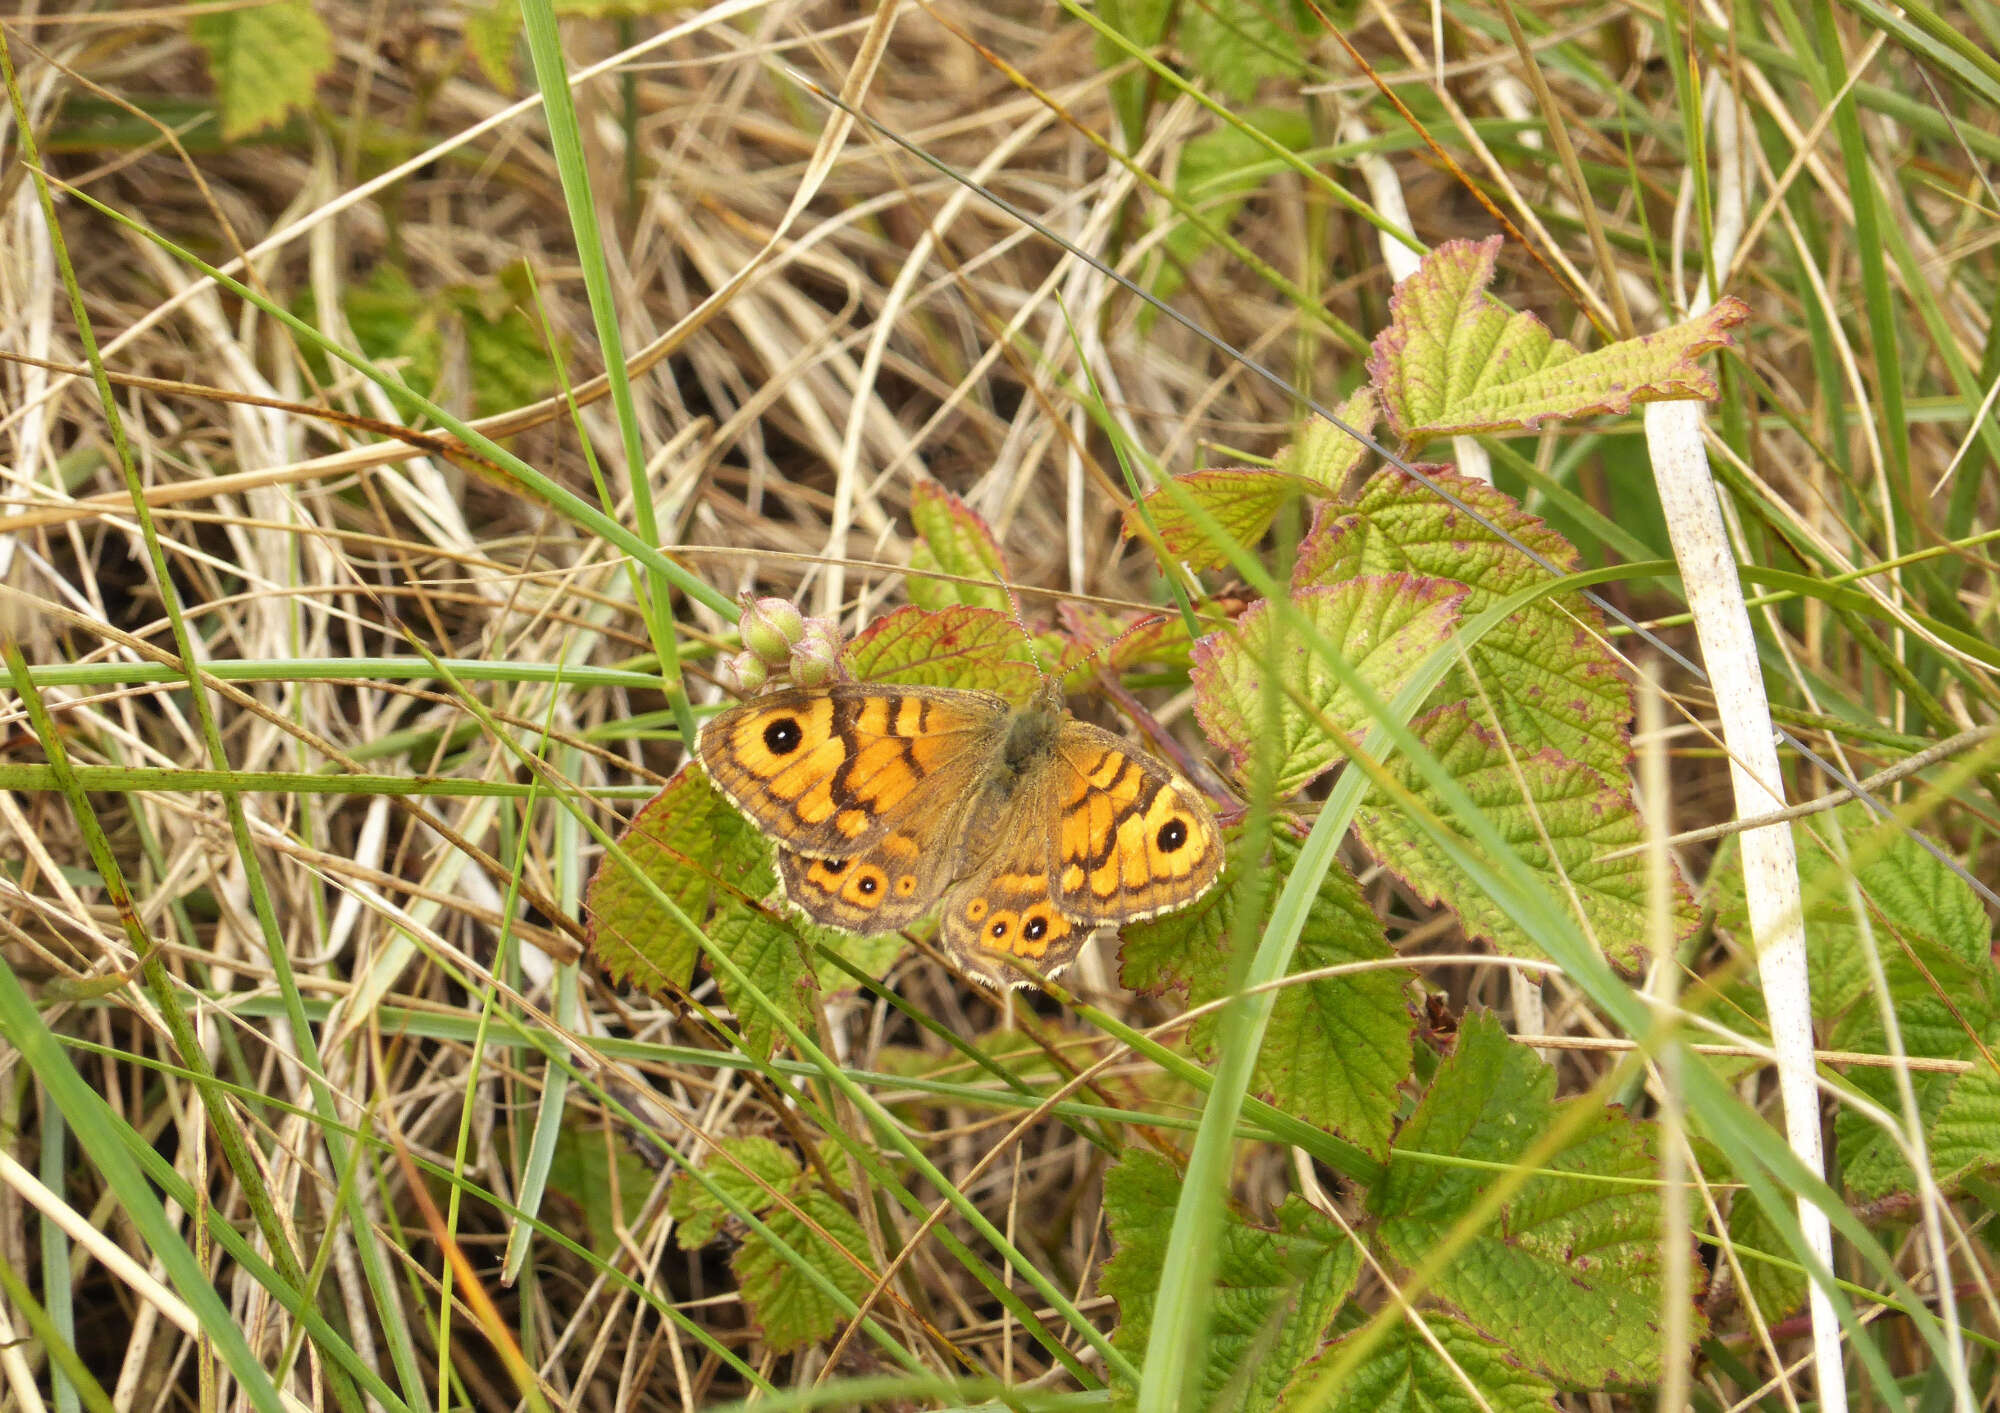 Wall Brown was initially a common resident prior to its general decline.